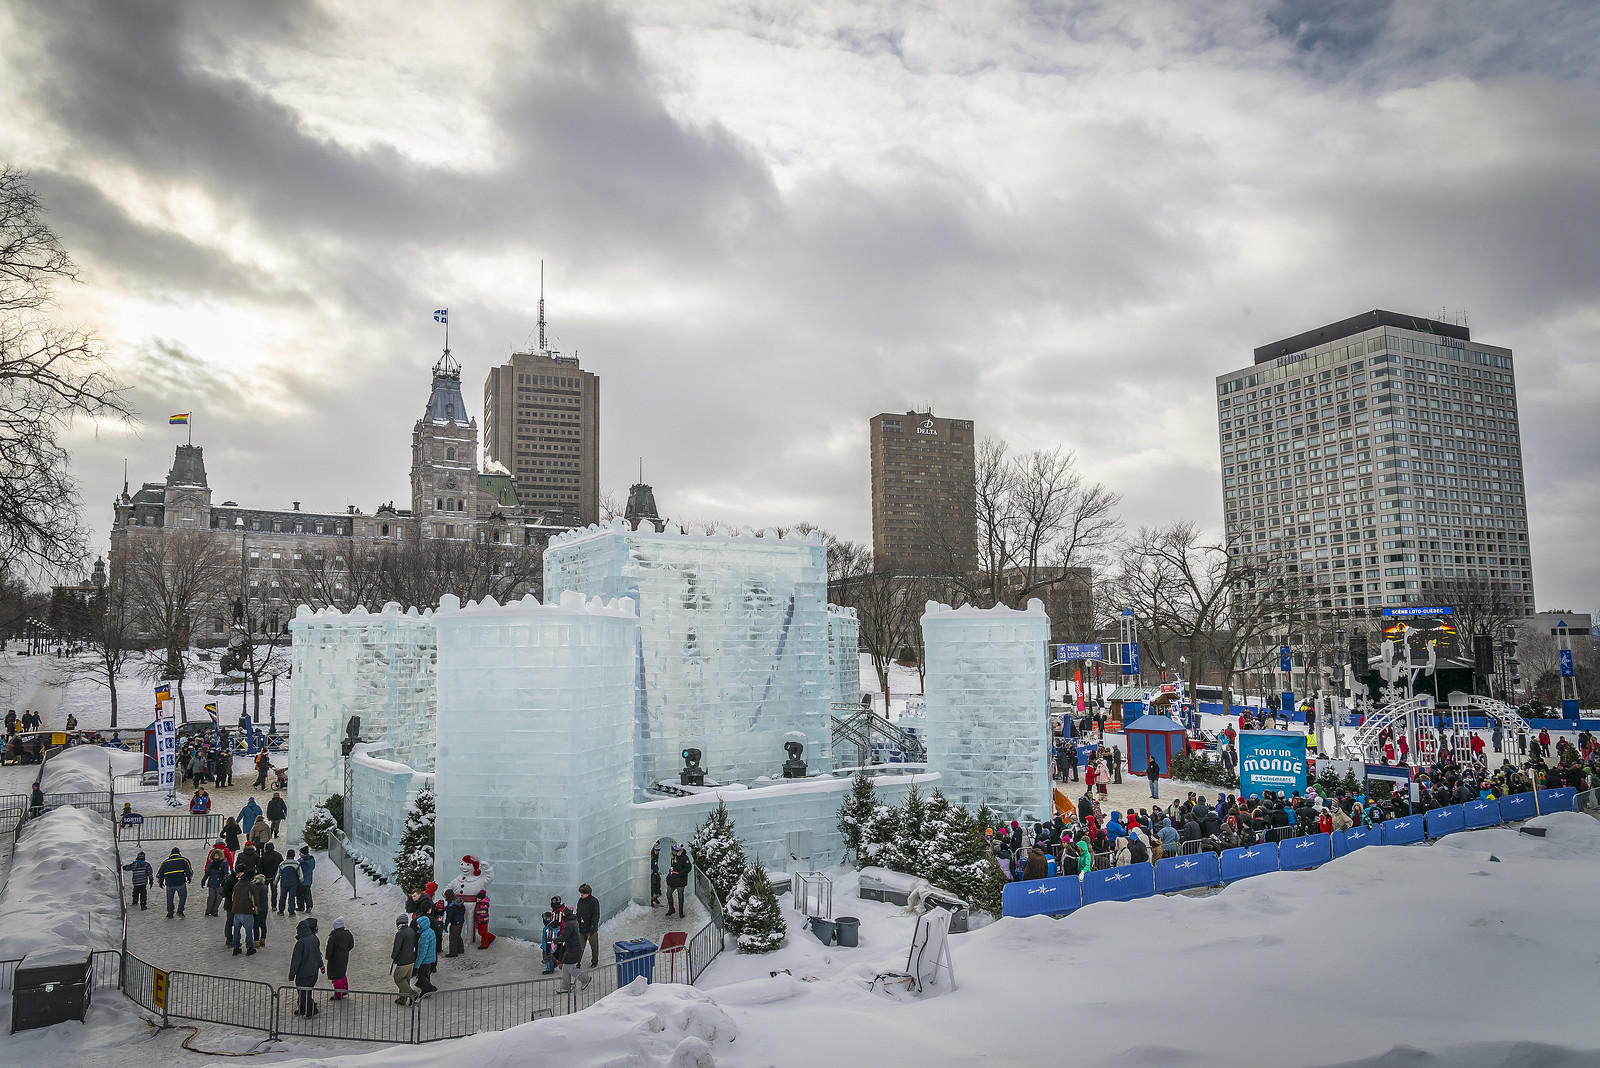 Winter Entertainments At Carnival In Quebec